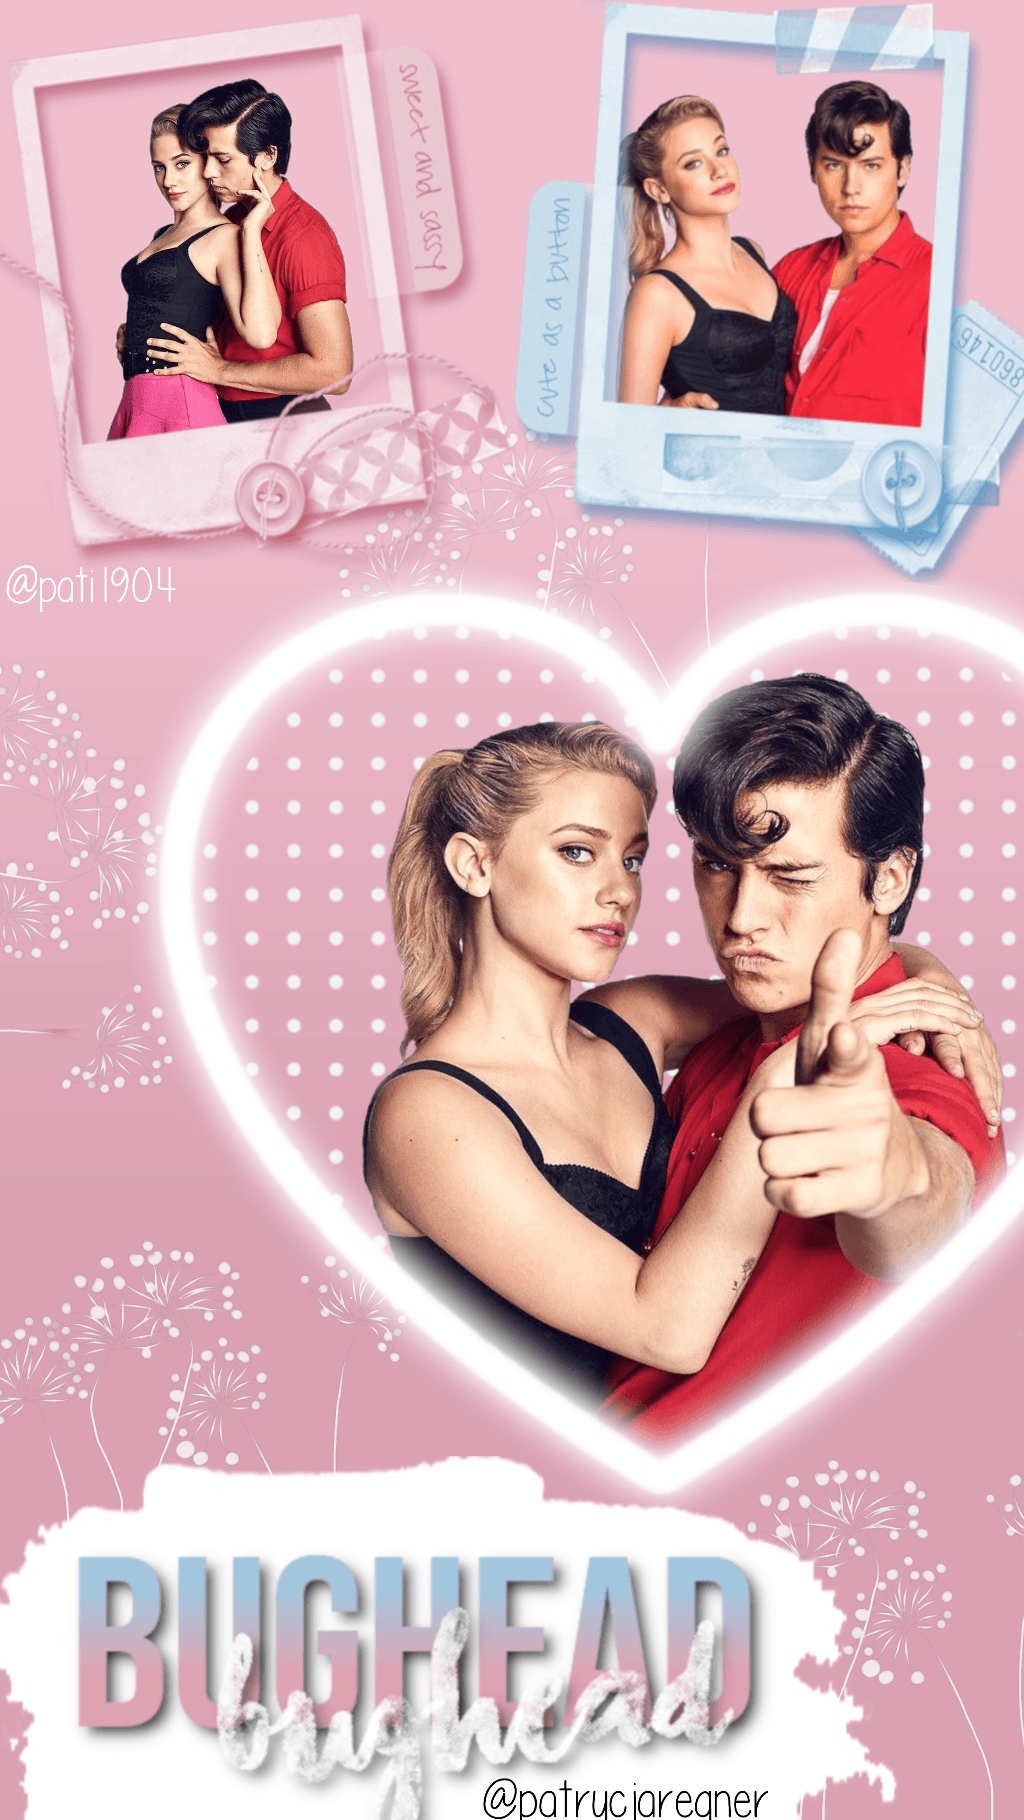 Riverdale Wallpaper.GiftWatches.CO